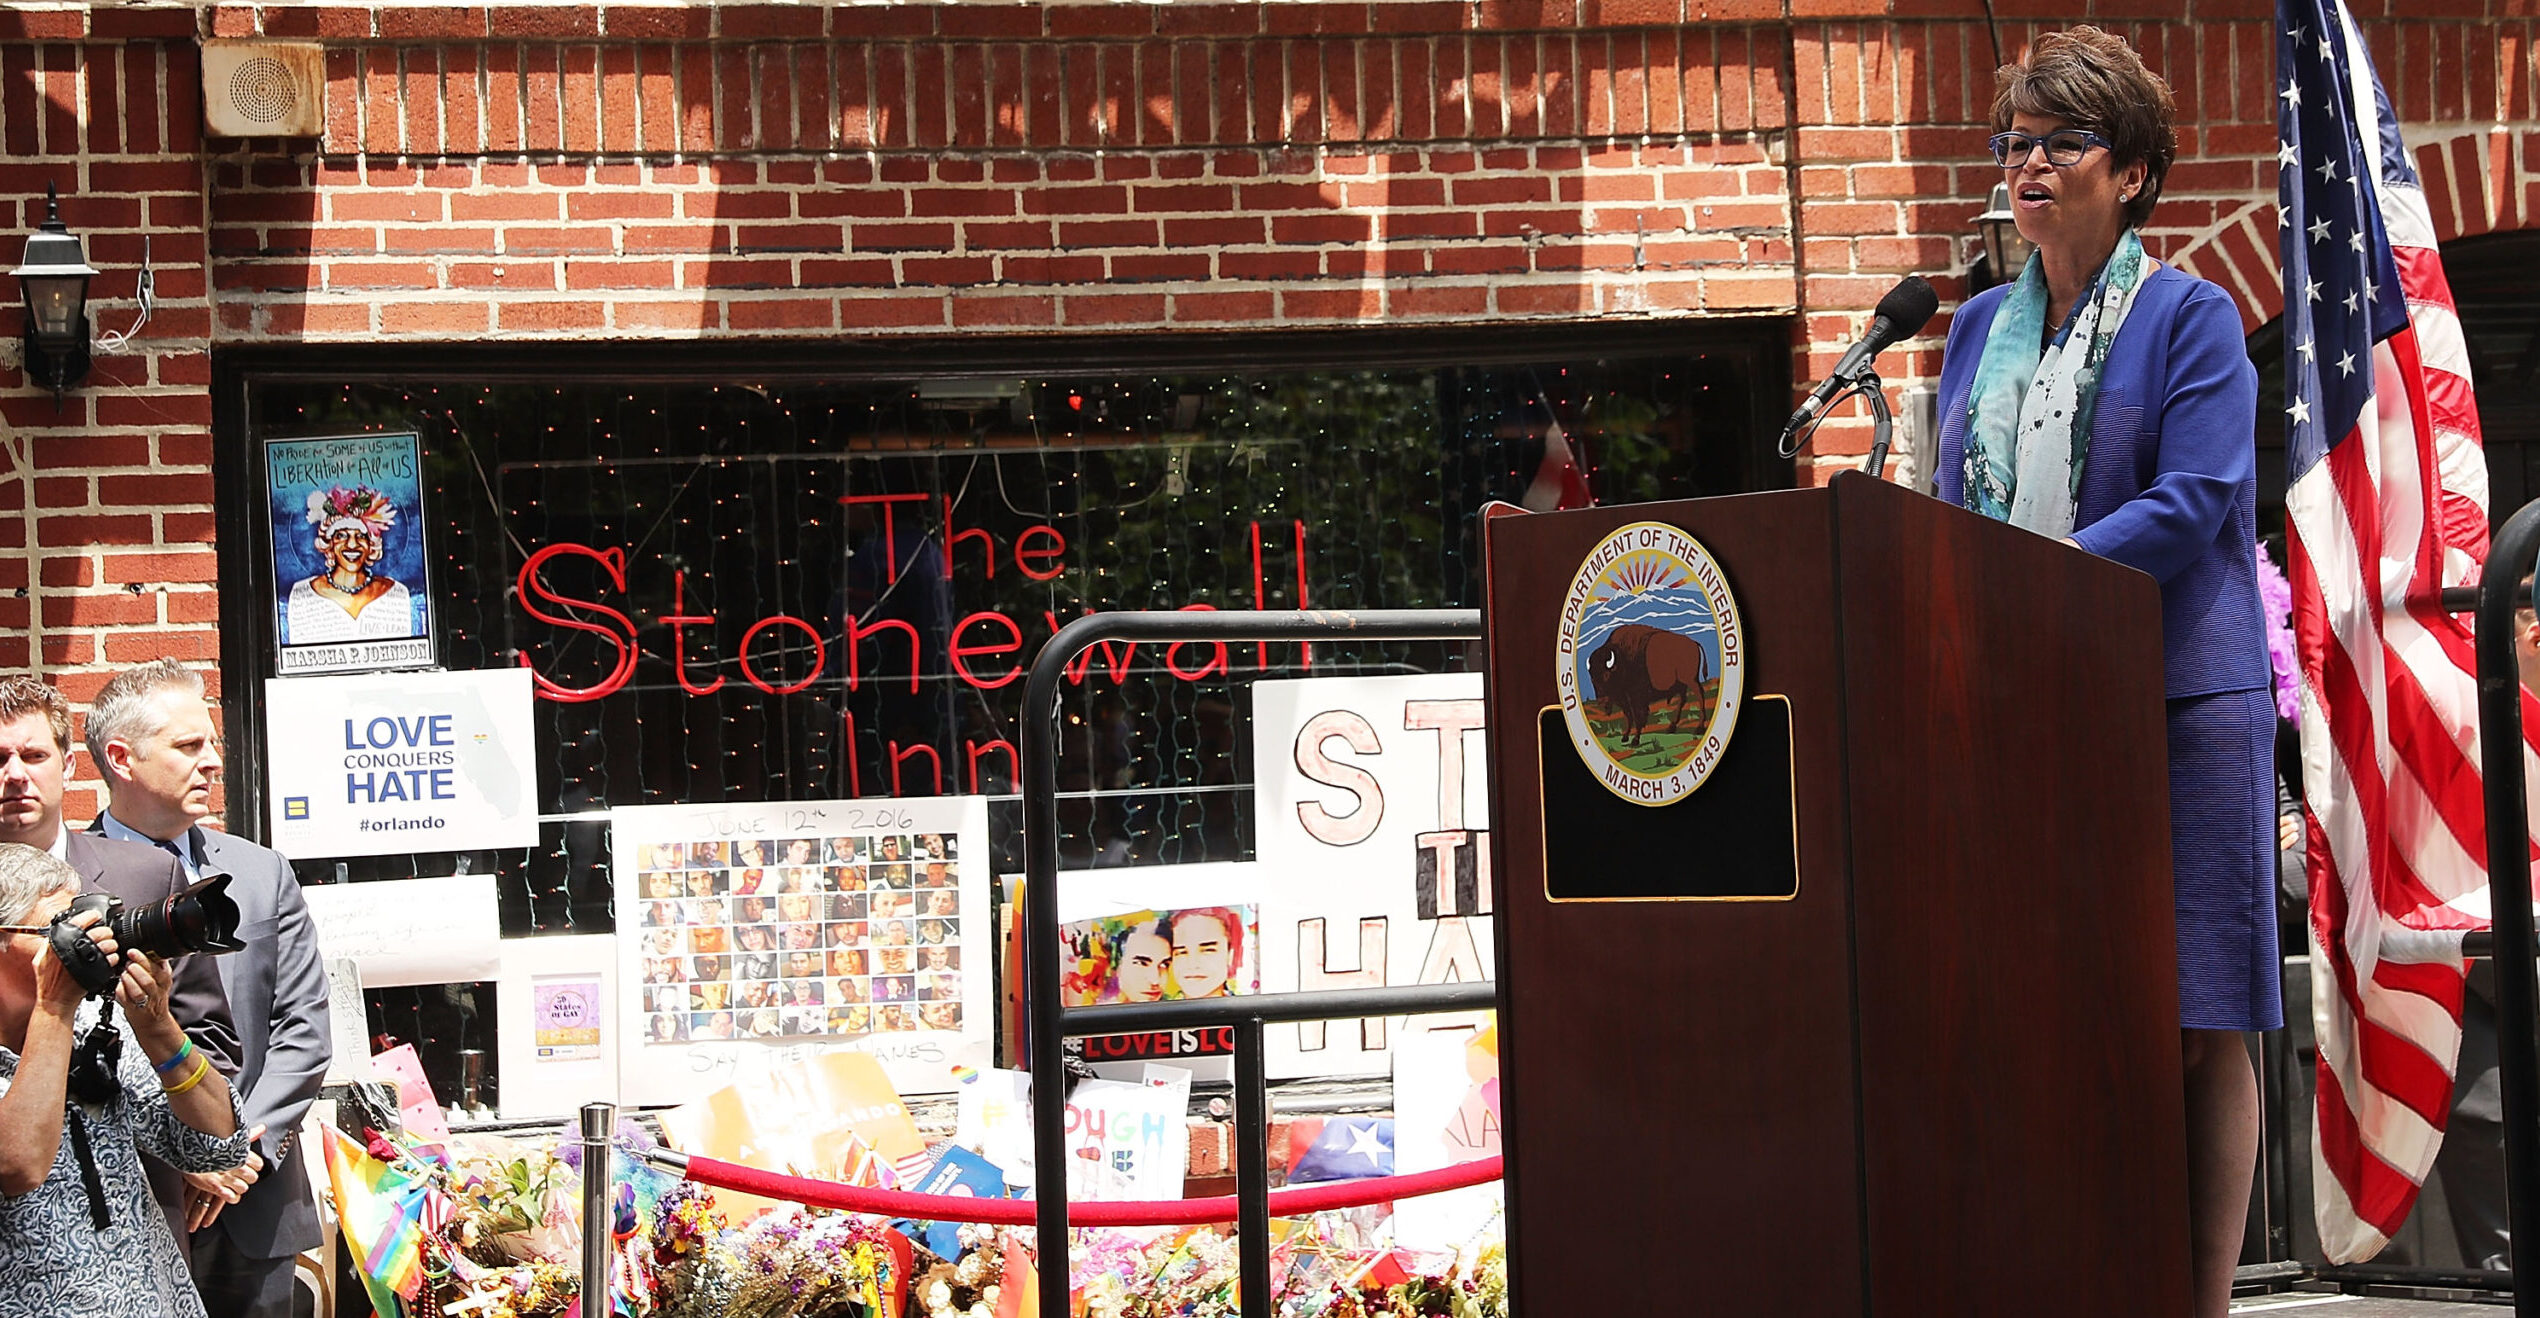 The Stonewall Inn National Monument Is Opening A Visitor Center